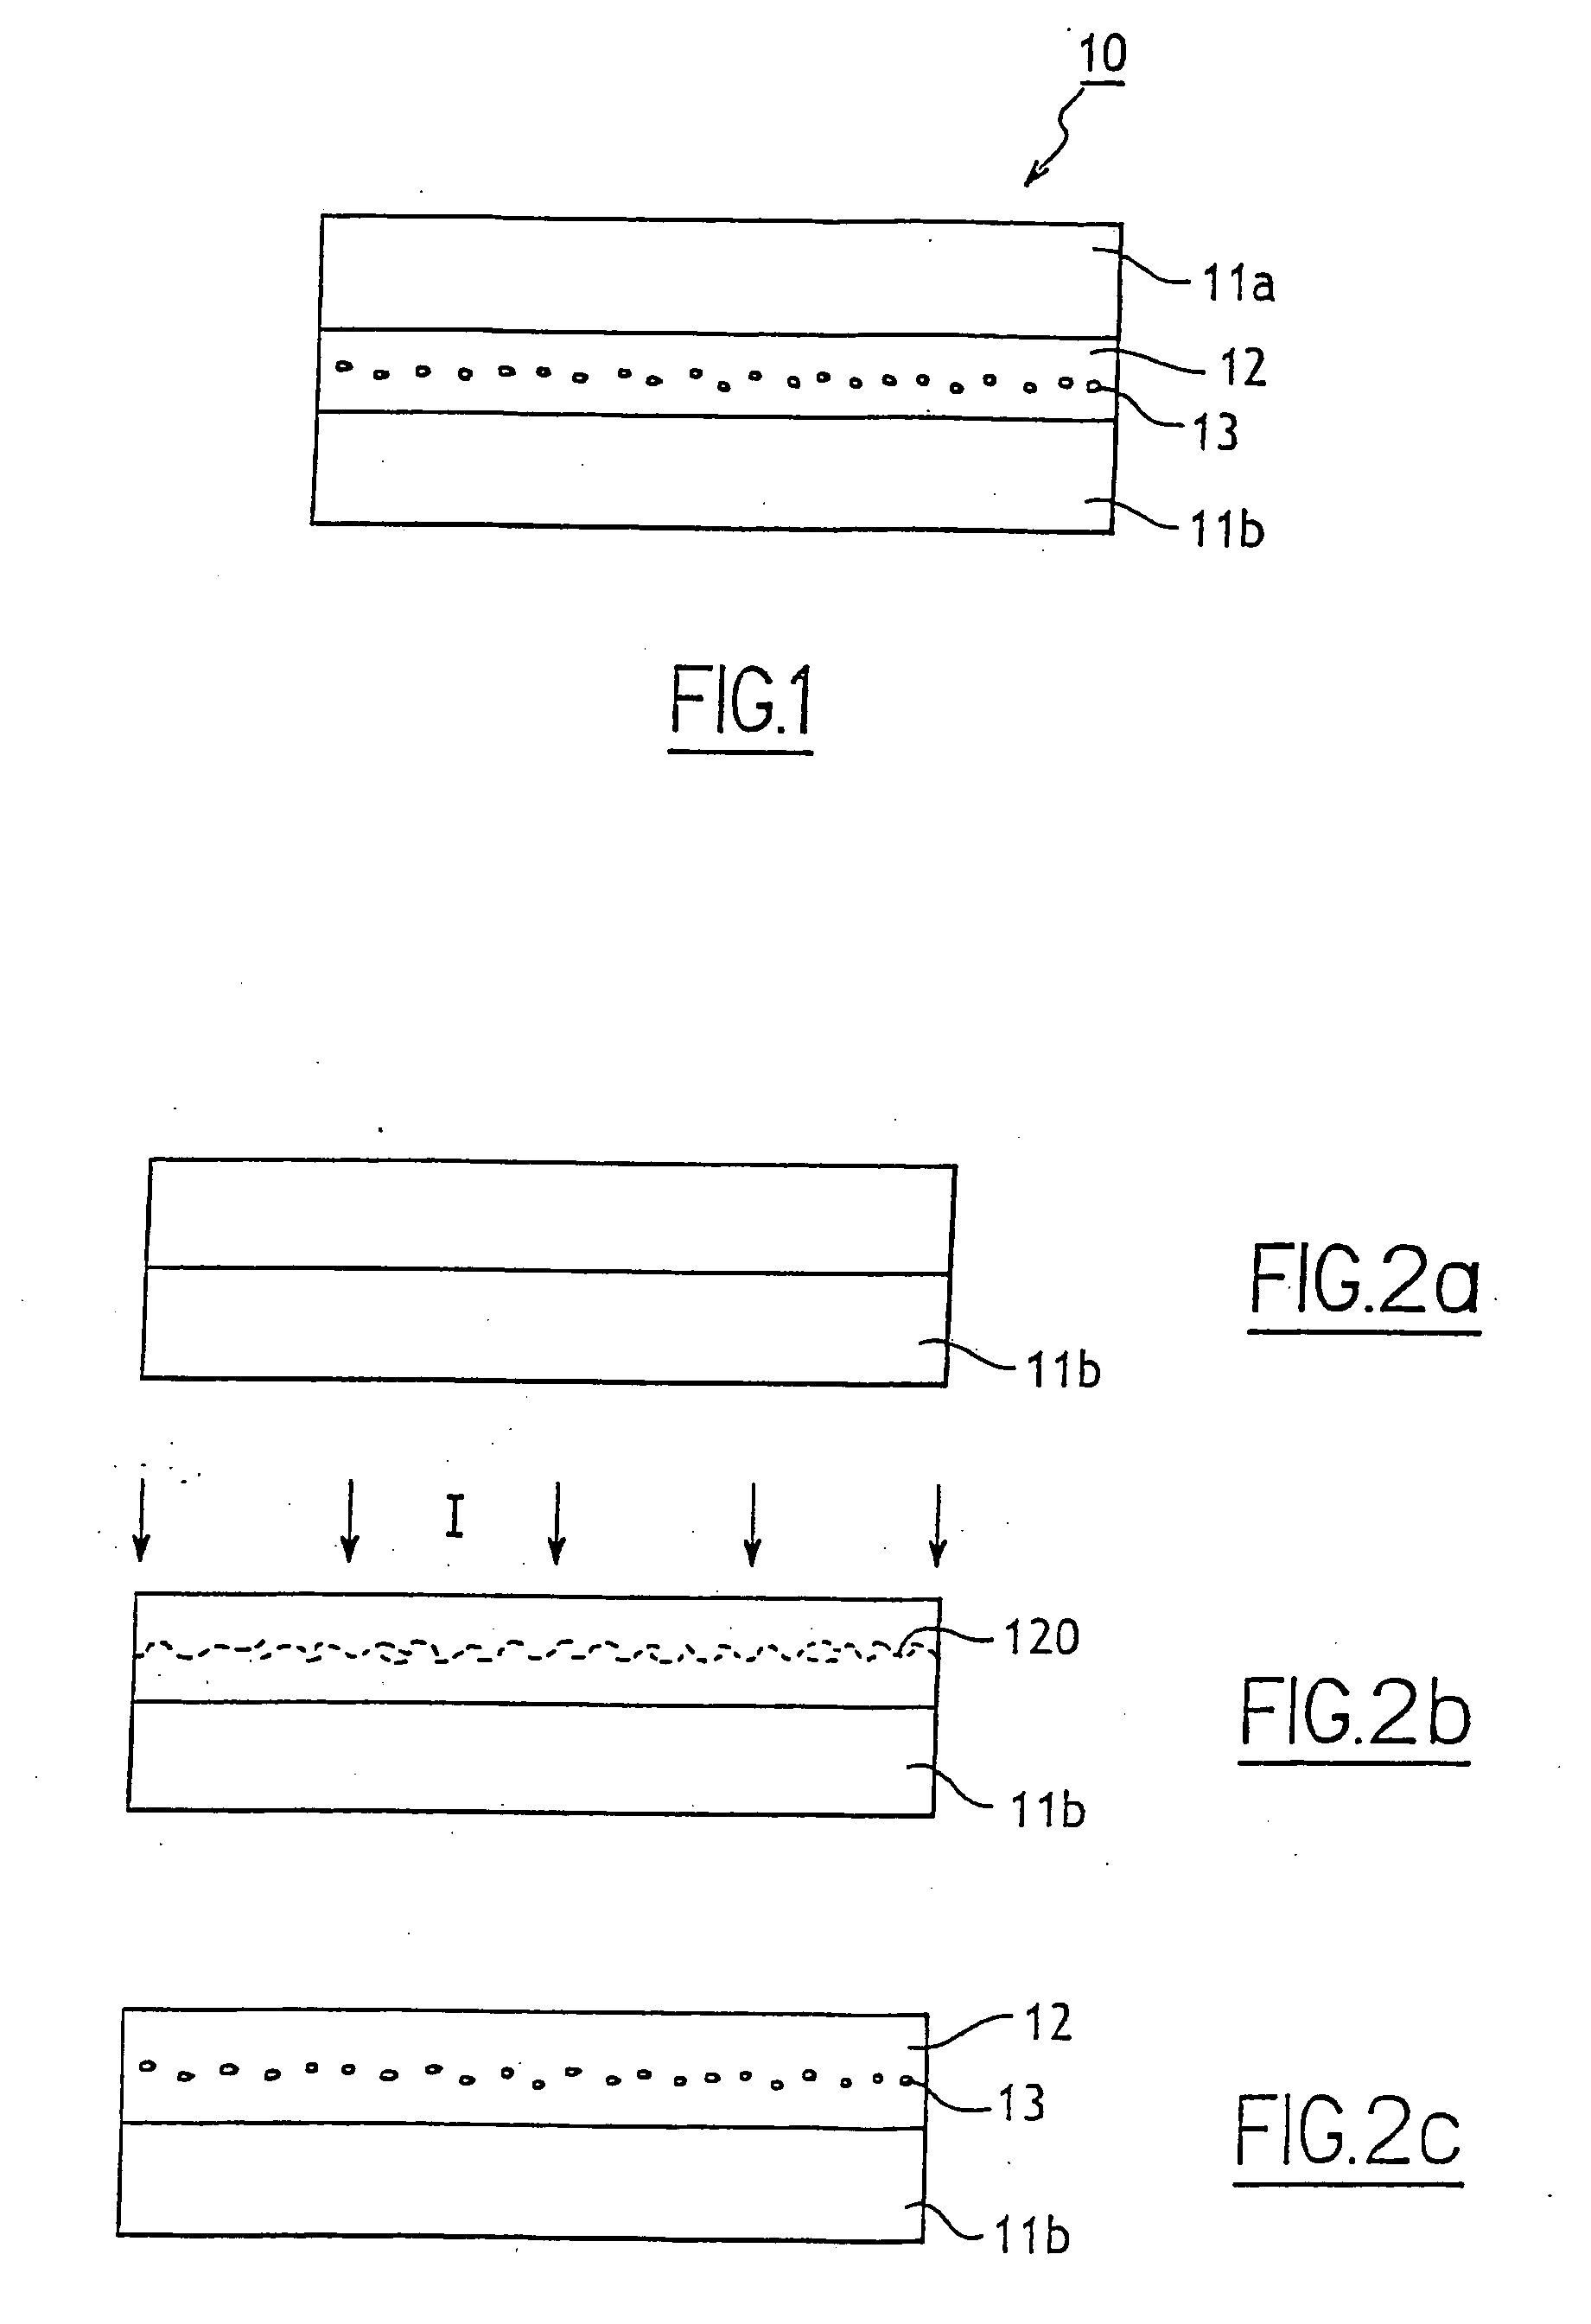 Method of fabricating a release substrate